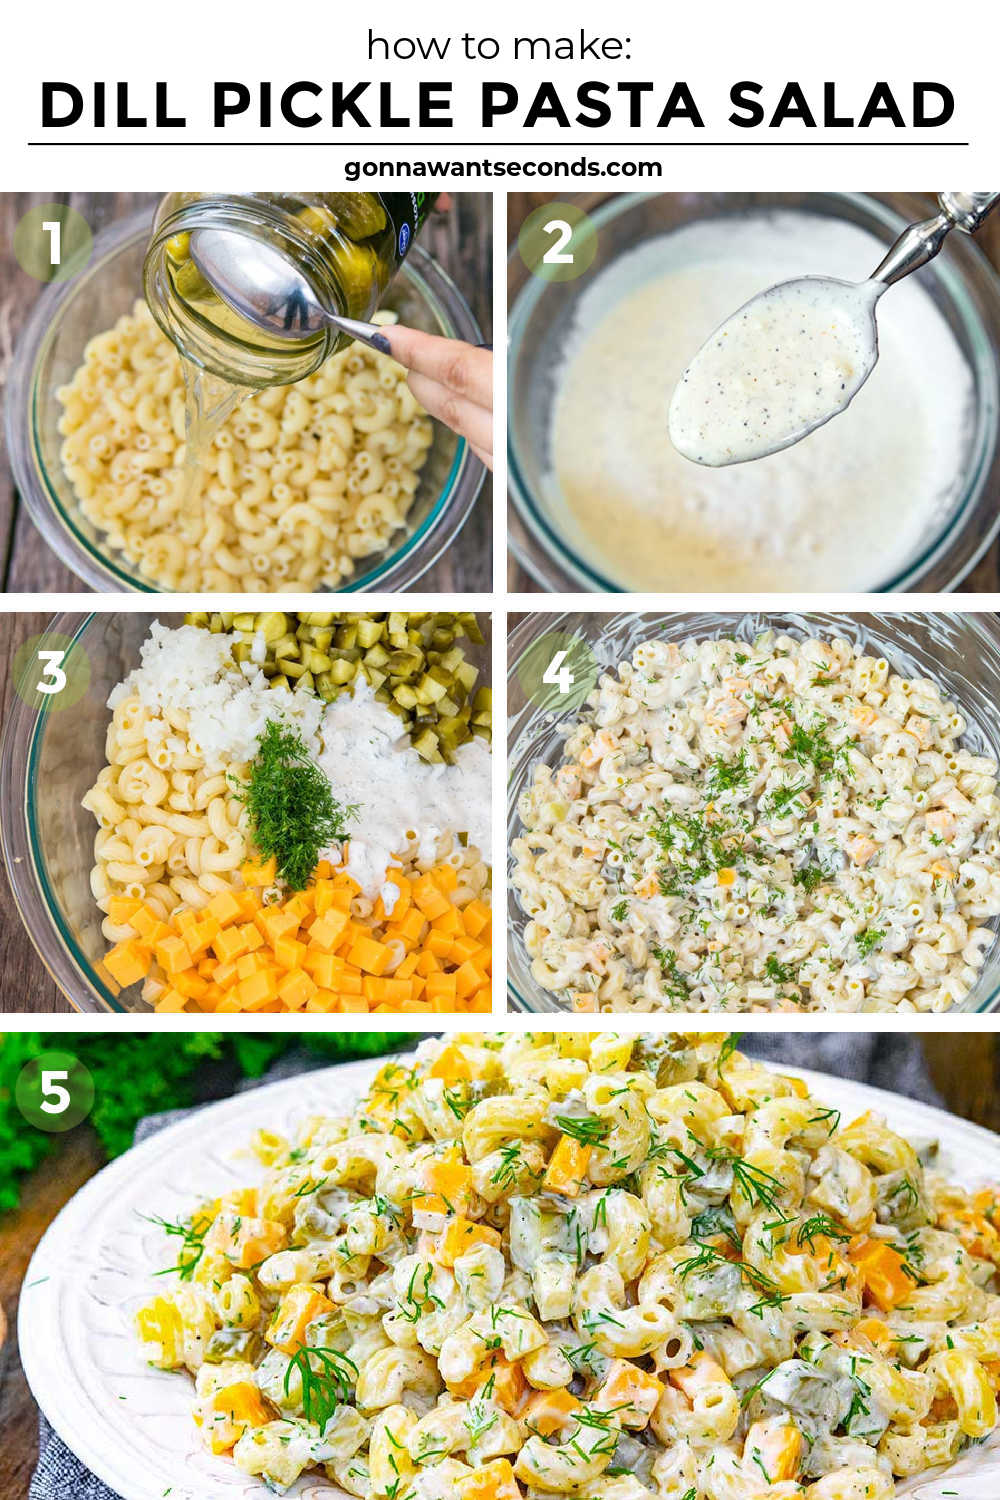 Step By Step How to make dill pickle pasta salad